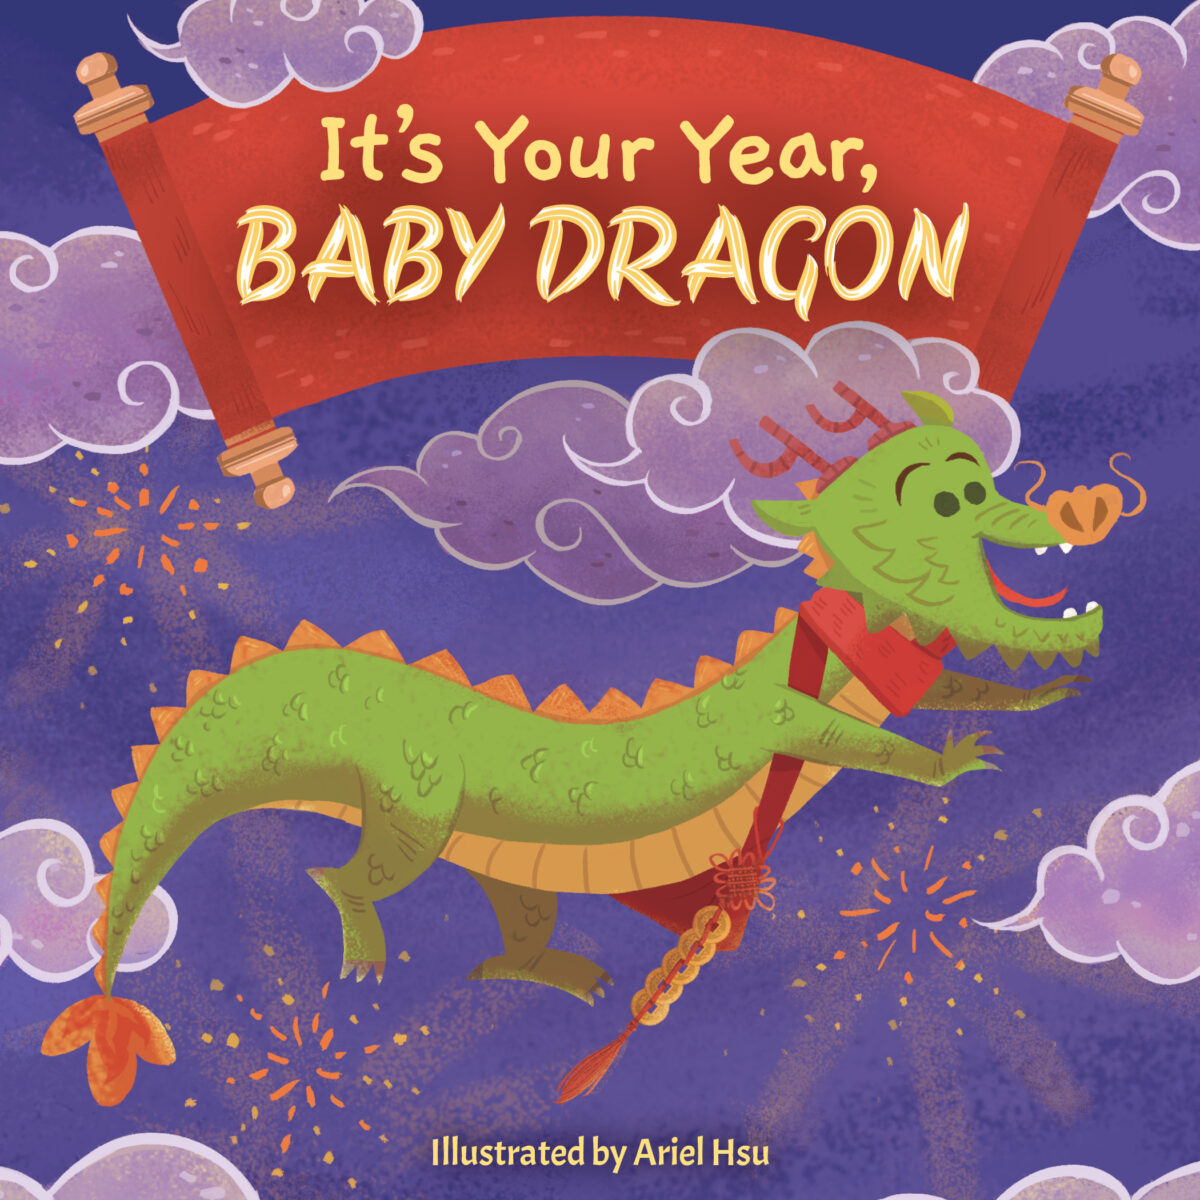 It’s Your Year, Baby Dragon